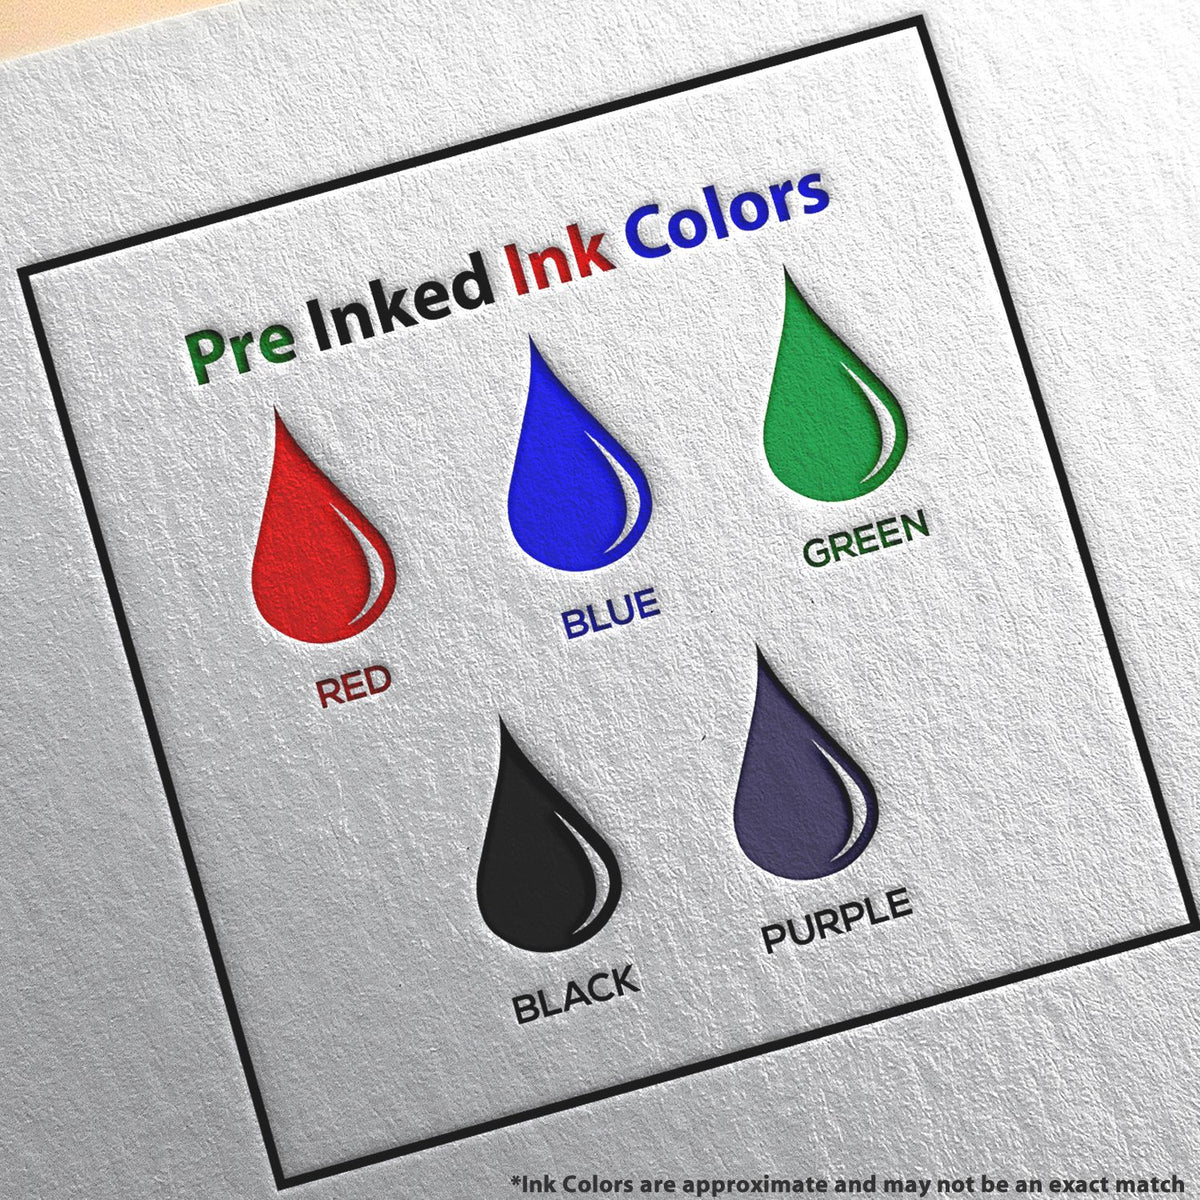 A picture showing the different ink colors or hues available for the Premium MaxLight Pre-Inked Oklahoma Landscape Architectural Stamp product.